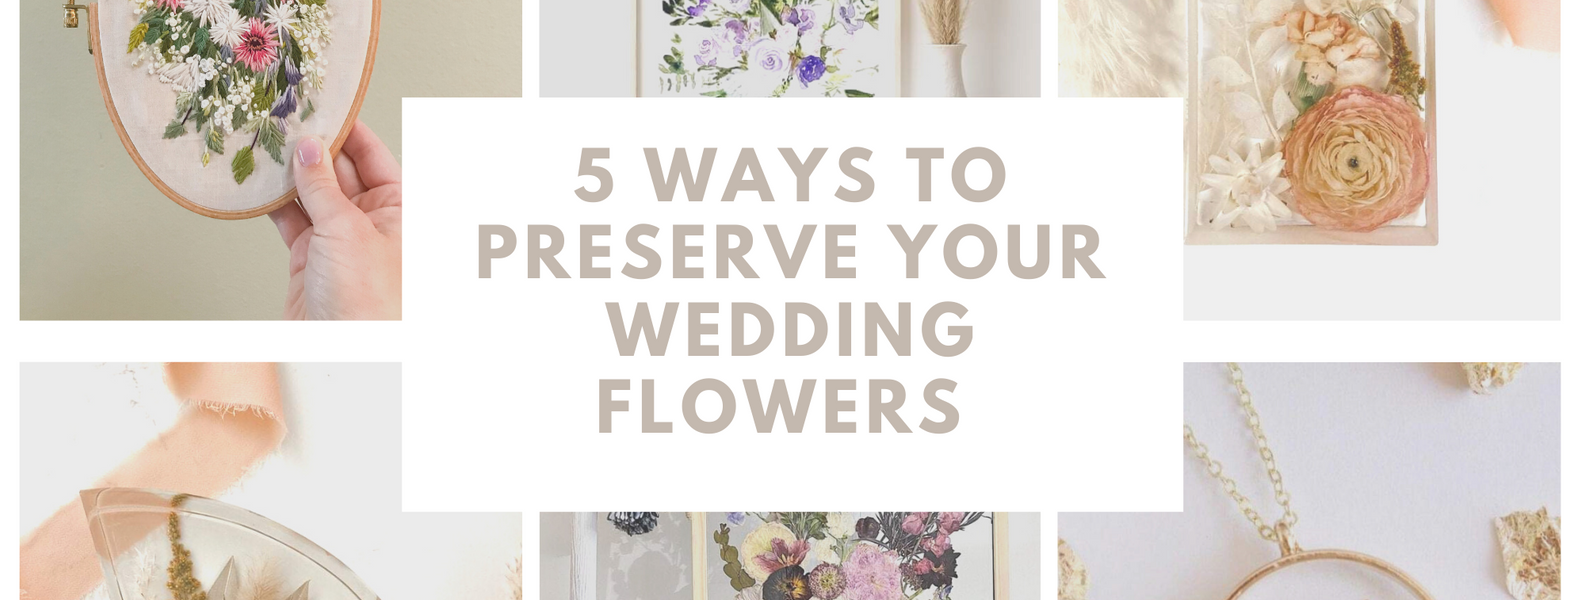 Cover Image for 5 ways to preserve your wedding flowers